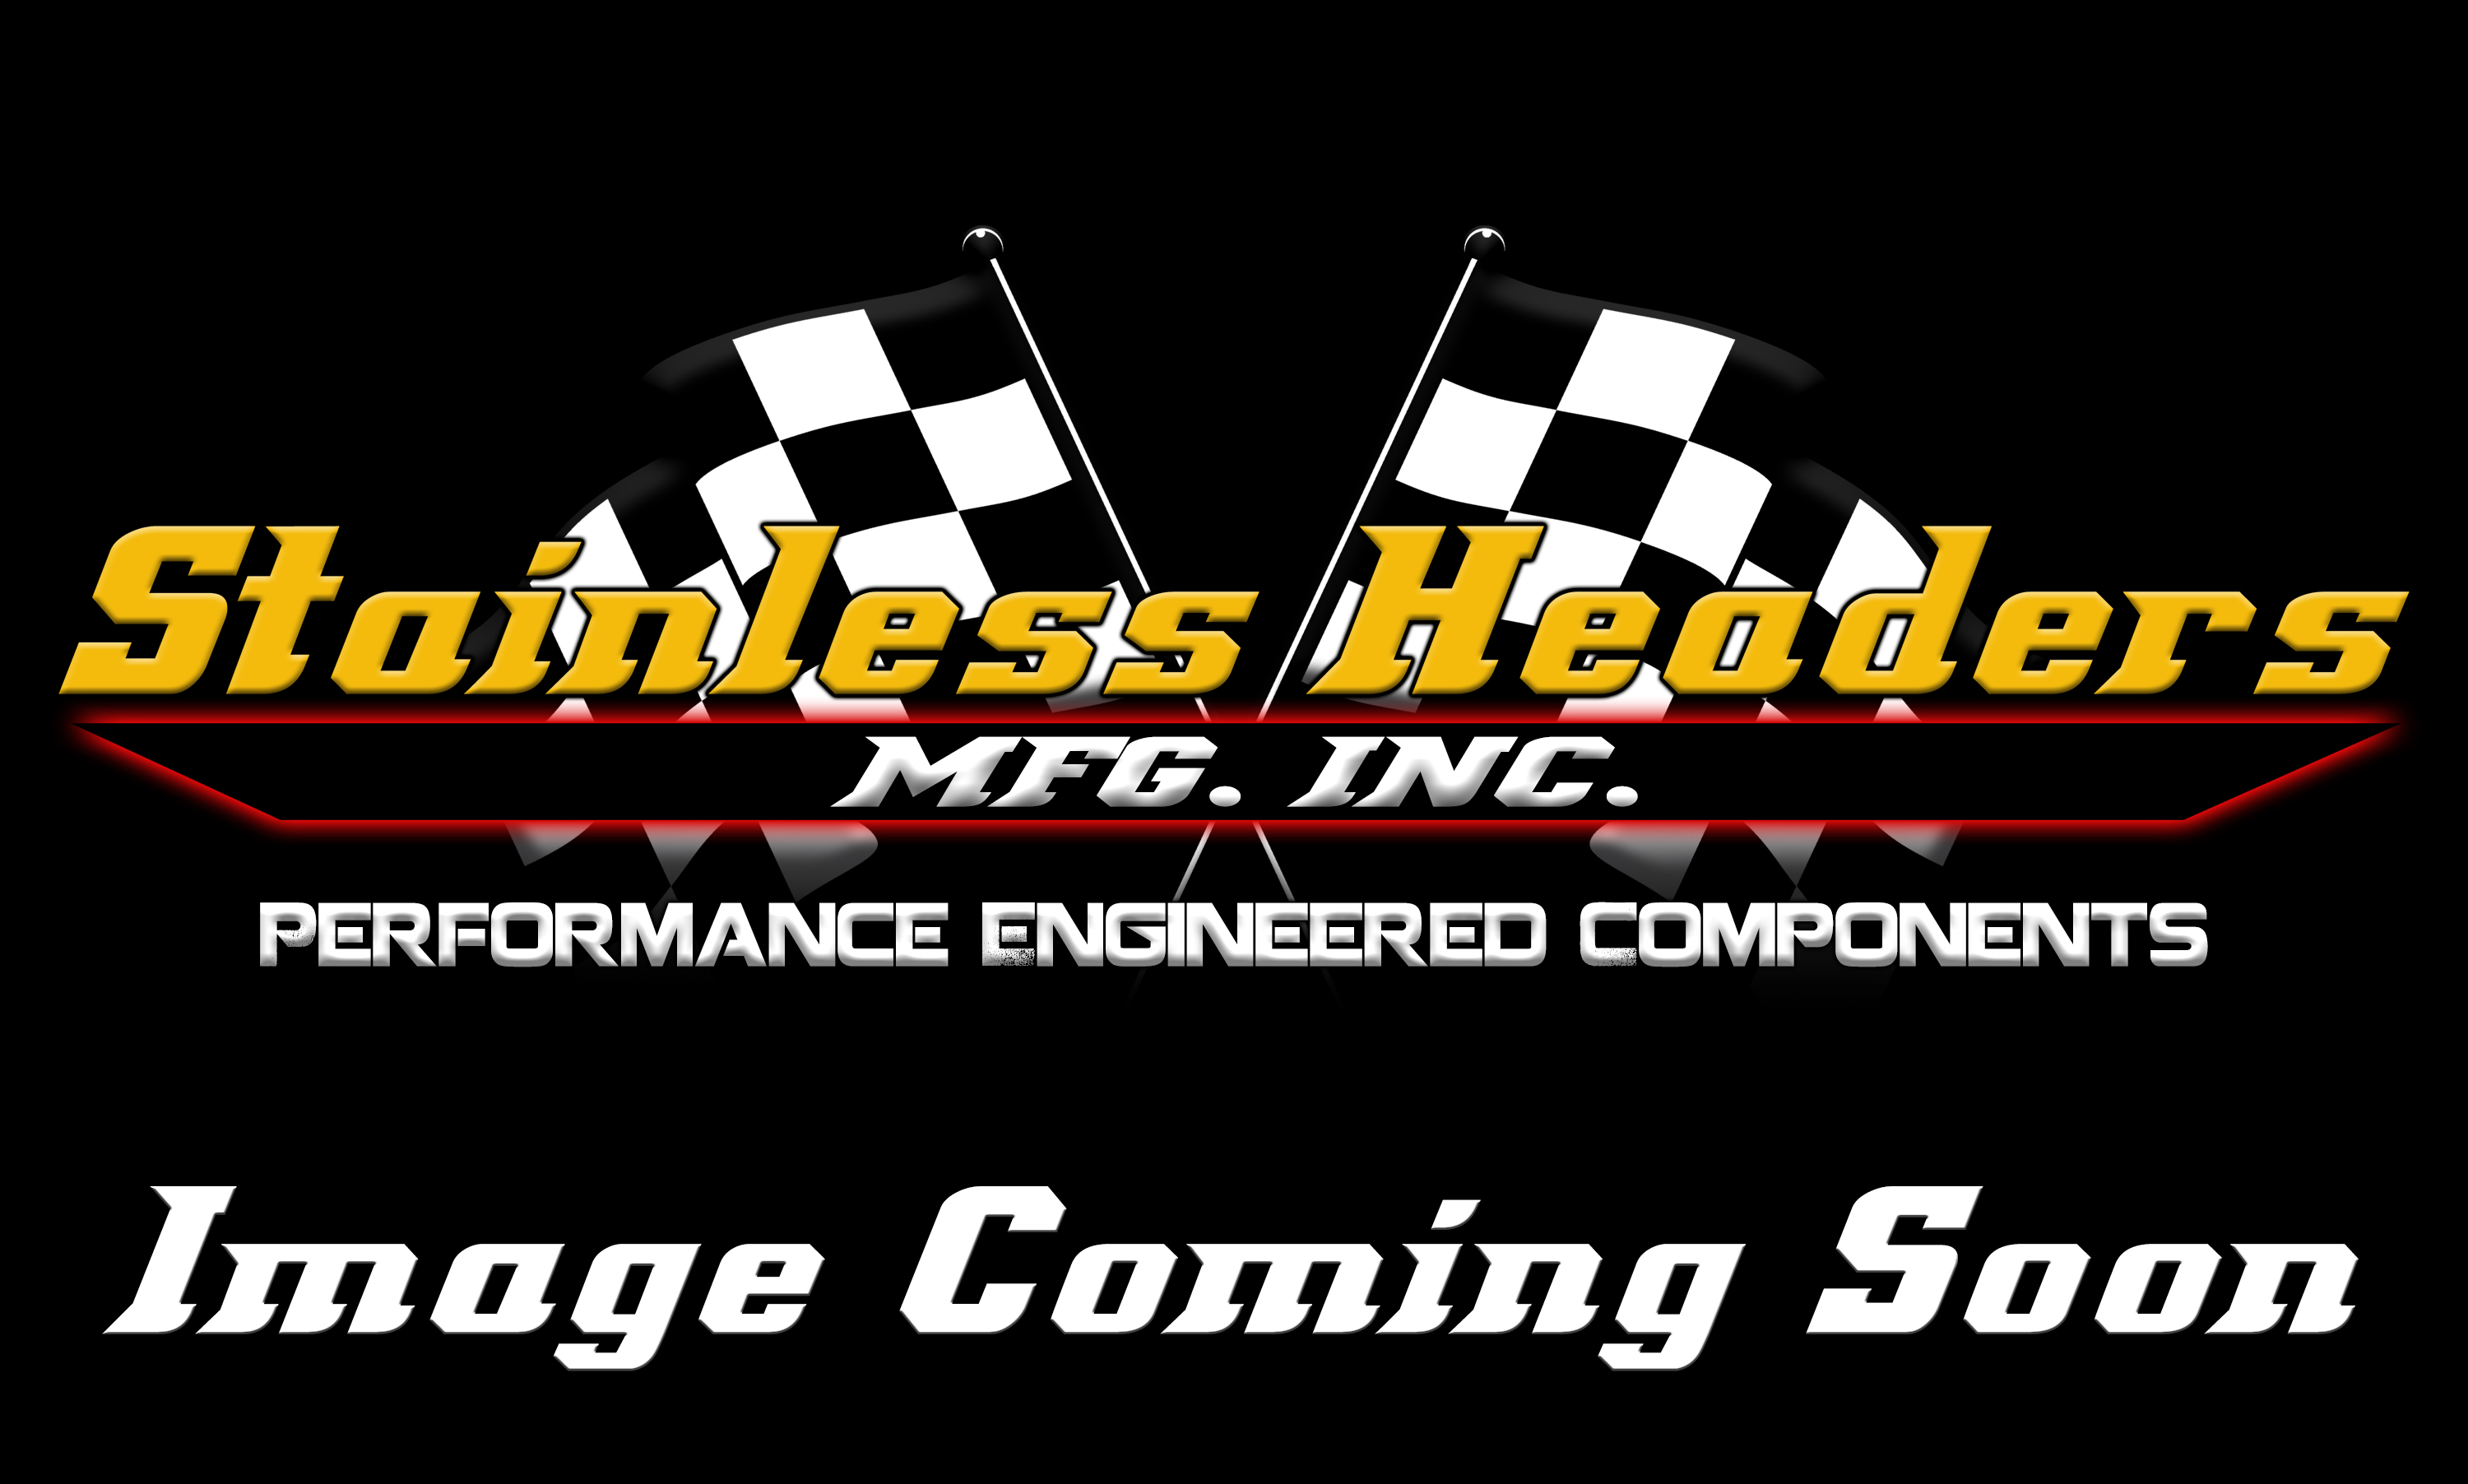 CompTurbo Technologies - CTR4204R-7490 Mid Frame Oil Lubricated 2.0 Turbocharger (1300 HP) - Image 1